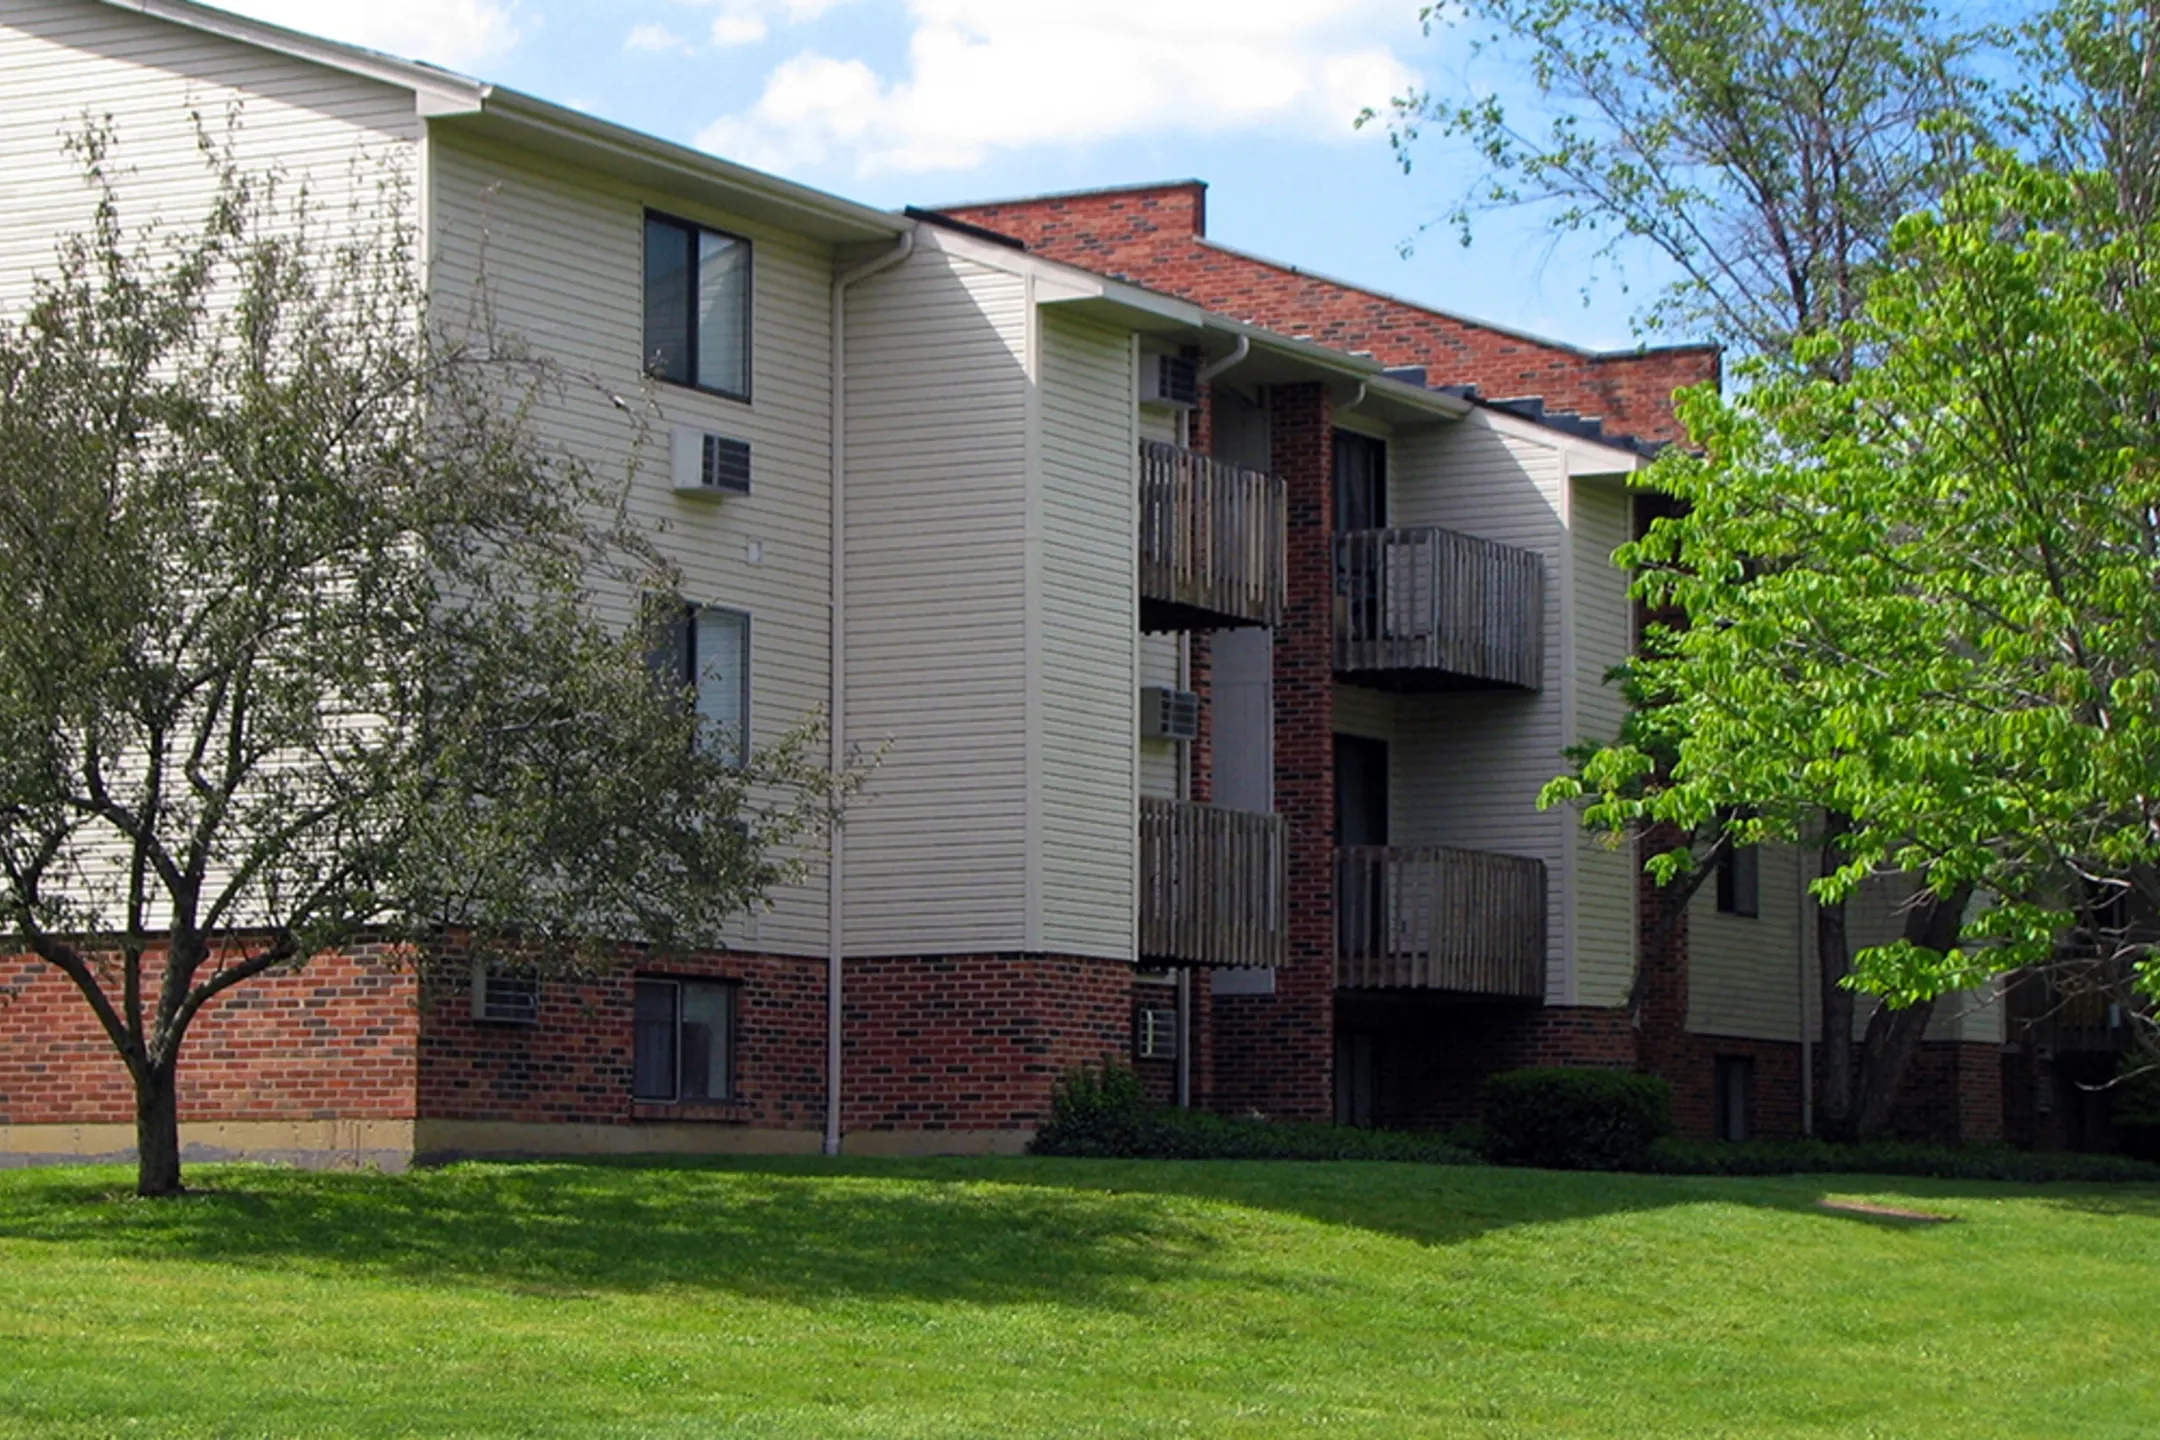 Building - Oakwood Apartments - Florence, KY